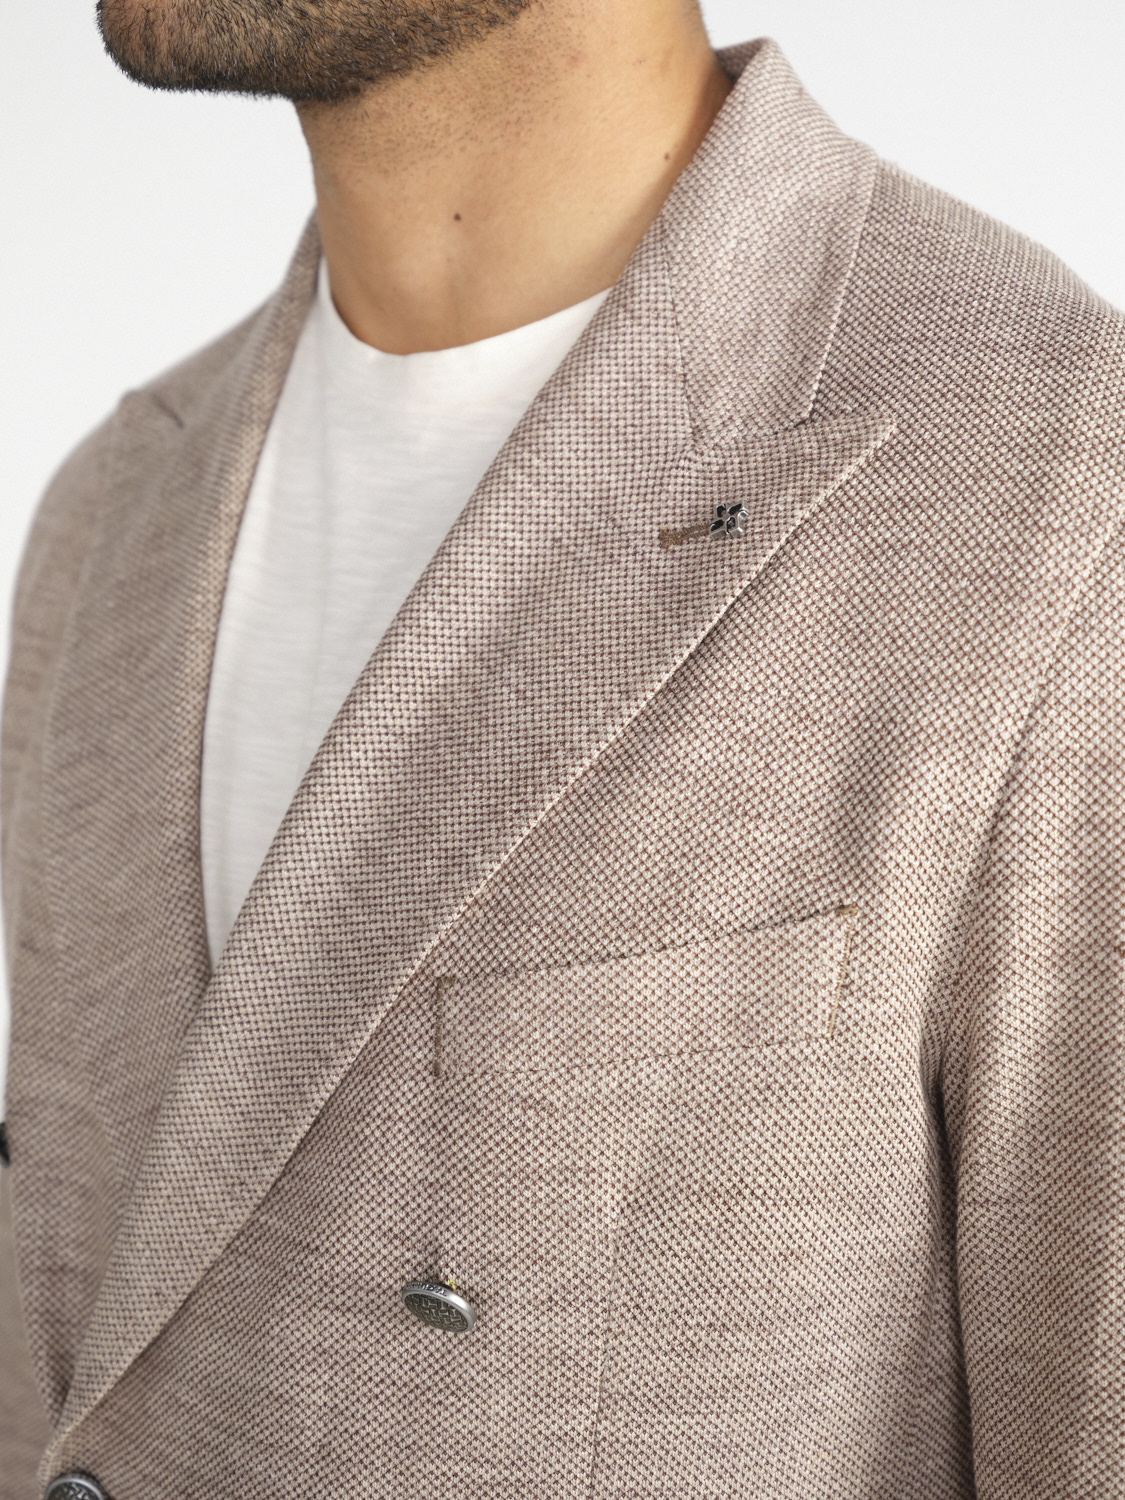 TAGLIATORE Jacket made from a linen-cotton mix  beige 48